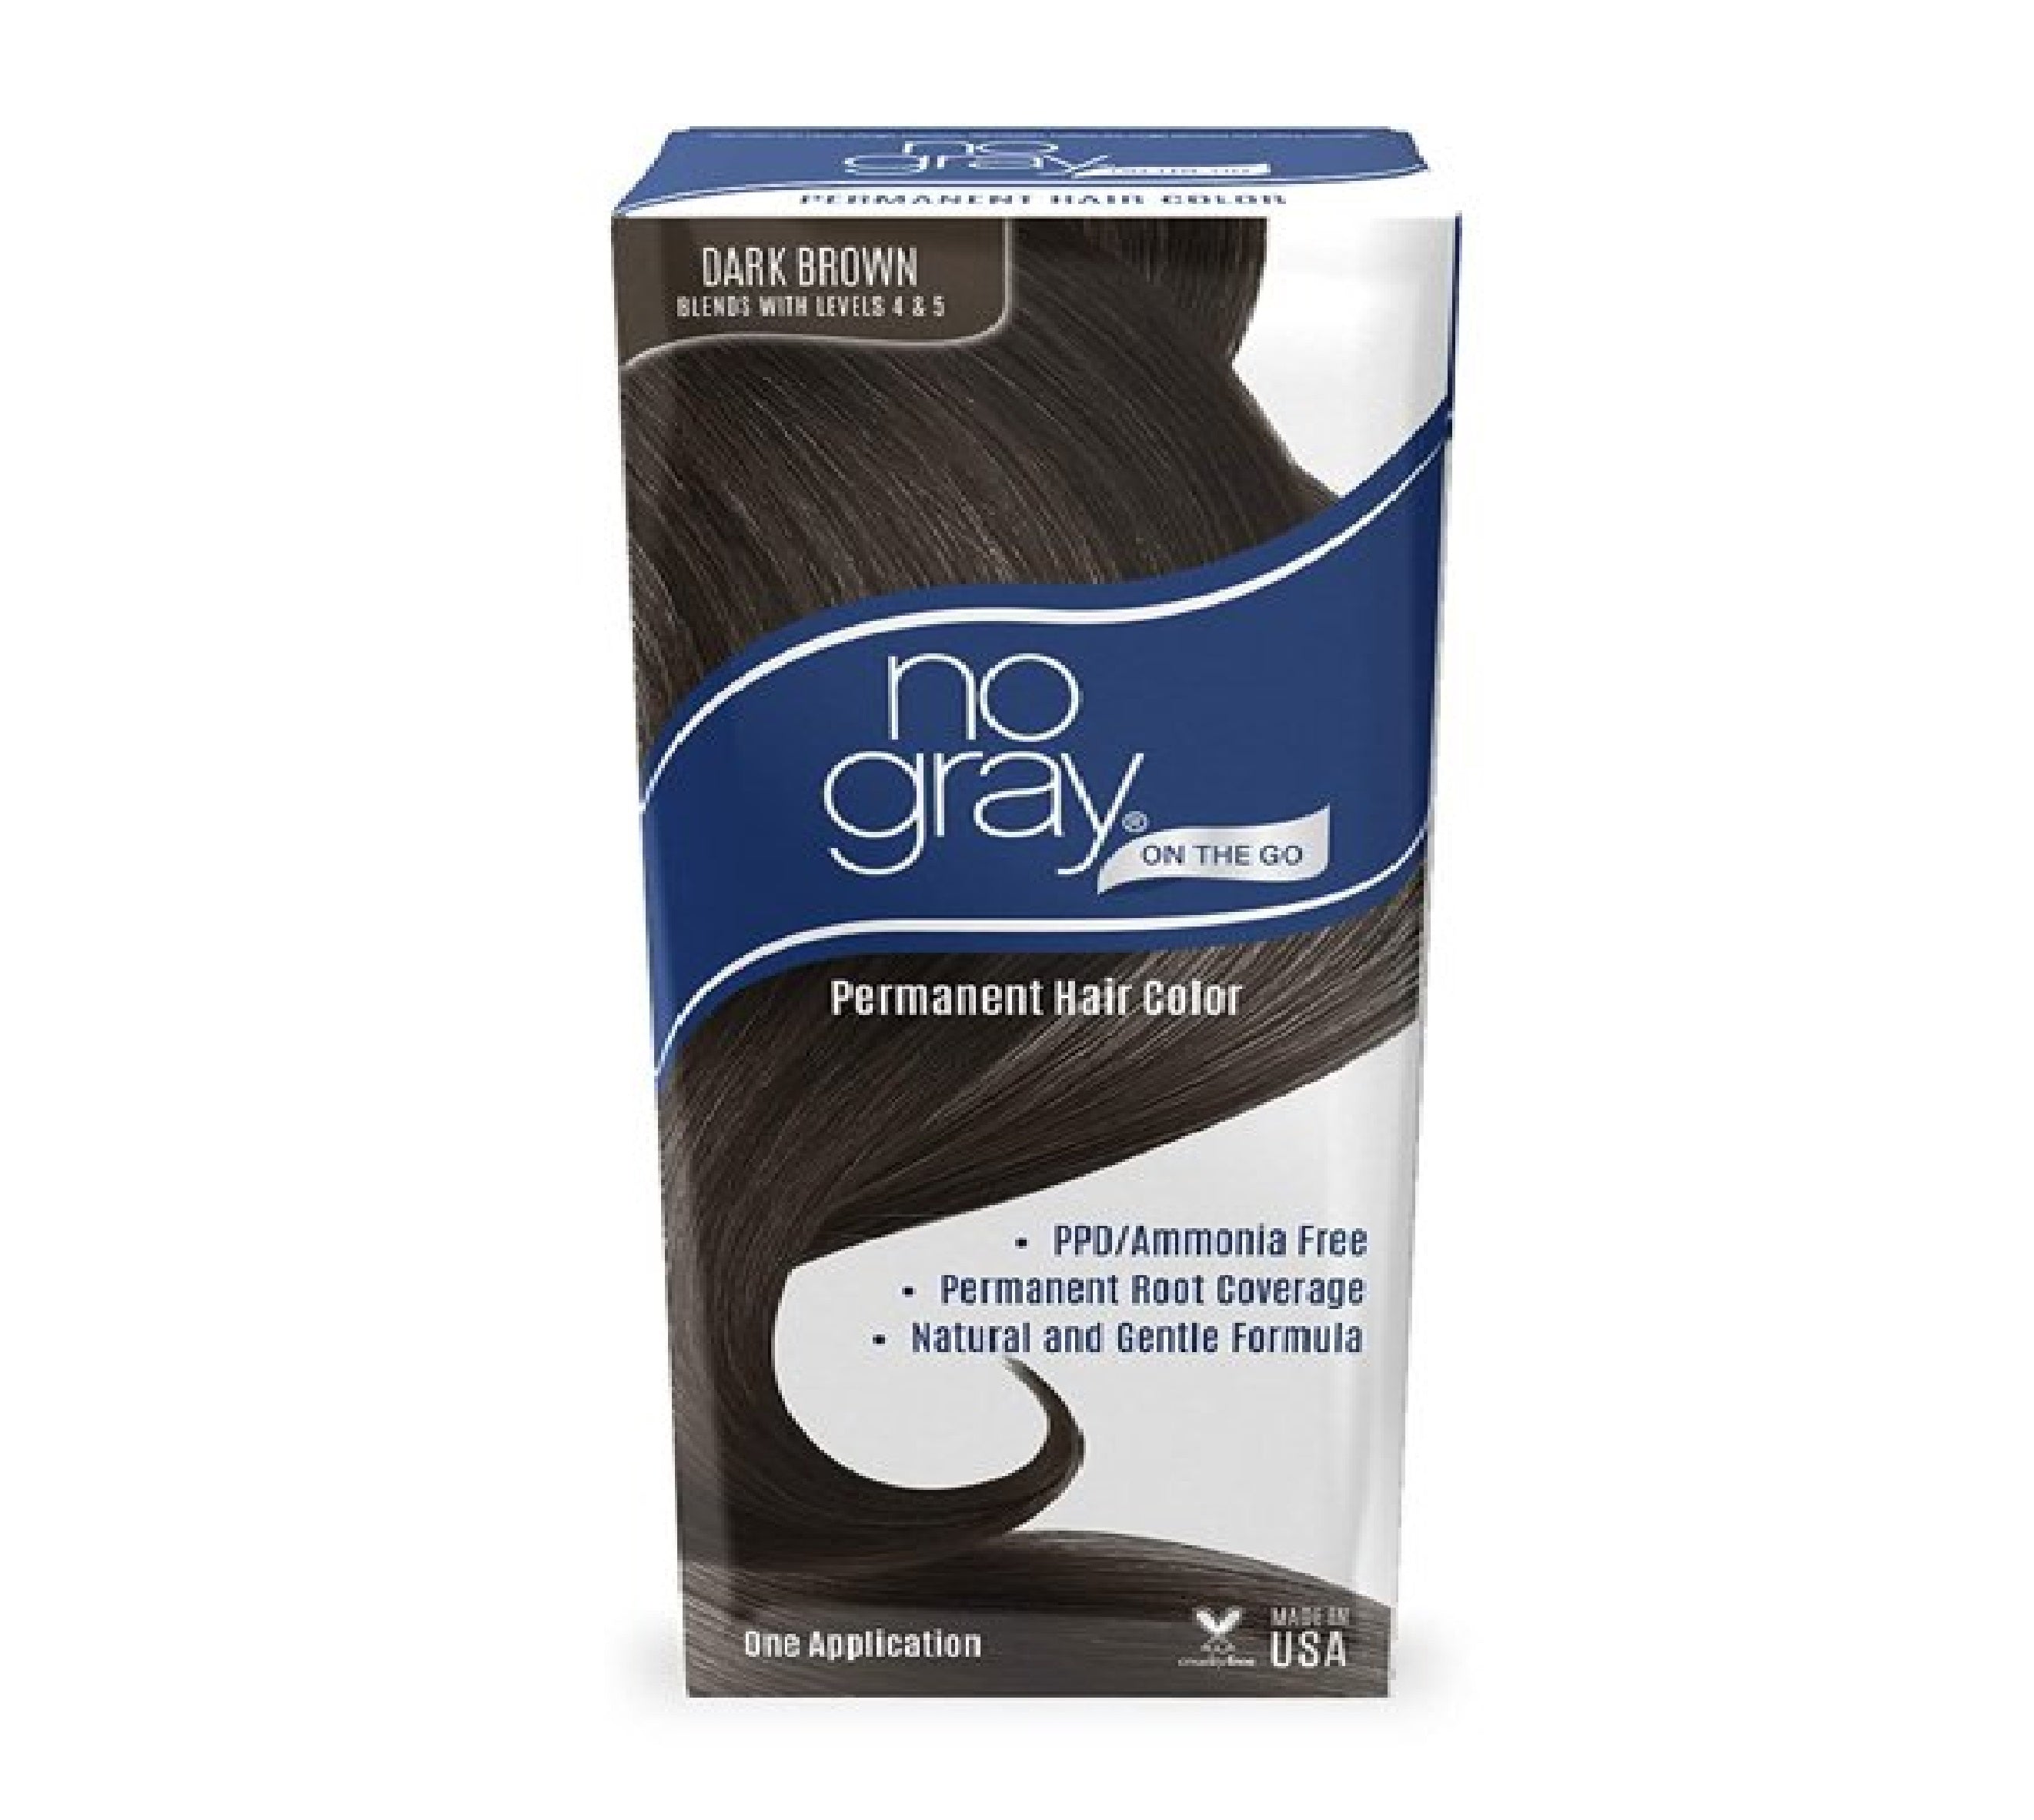 No Gray On The Go Root Touch-up Systems - Dark Brown